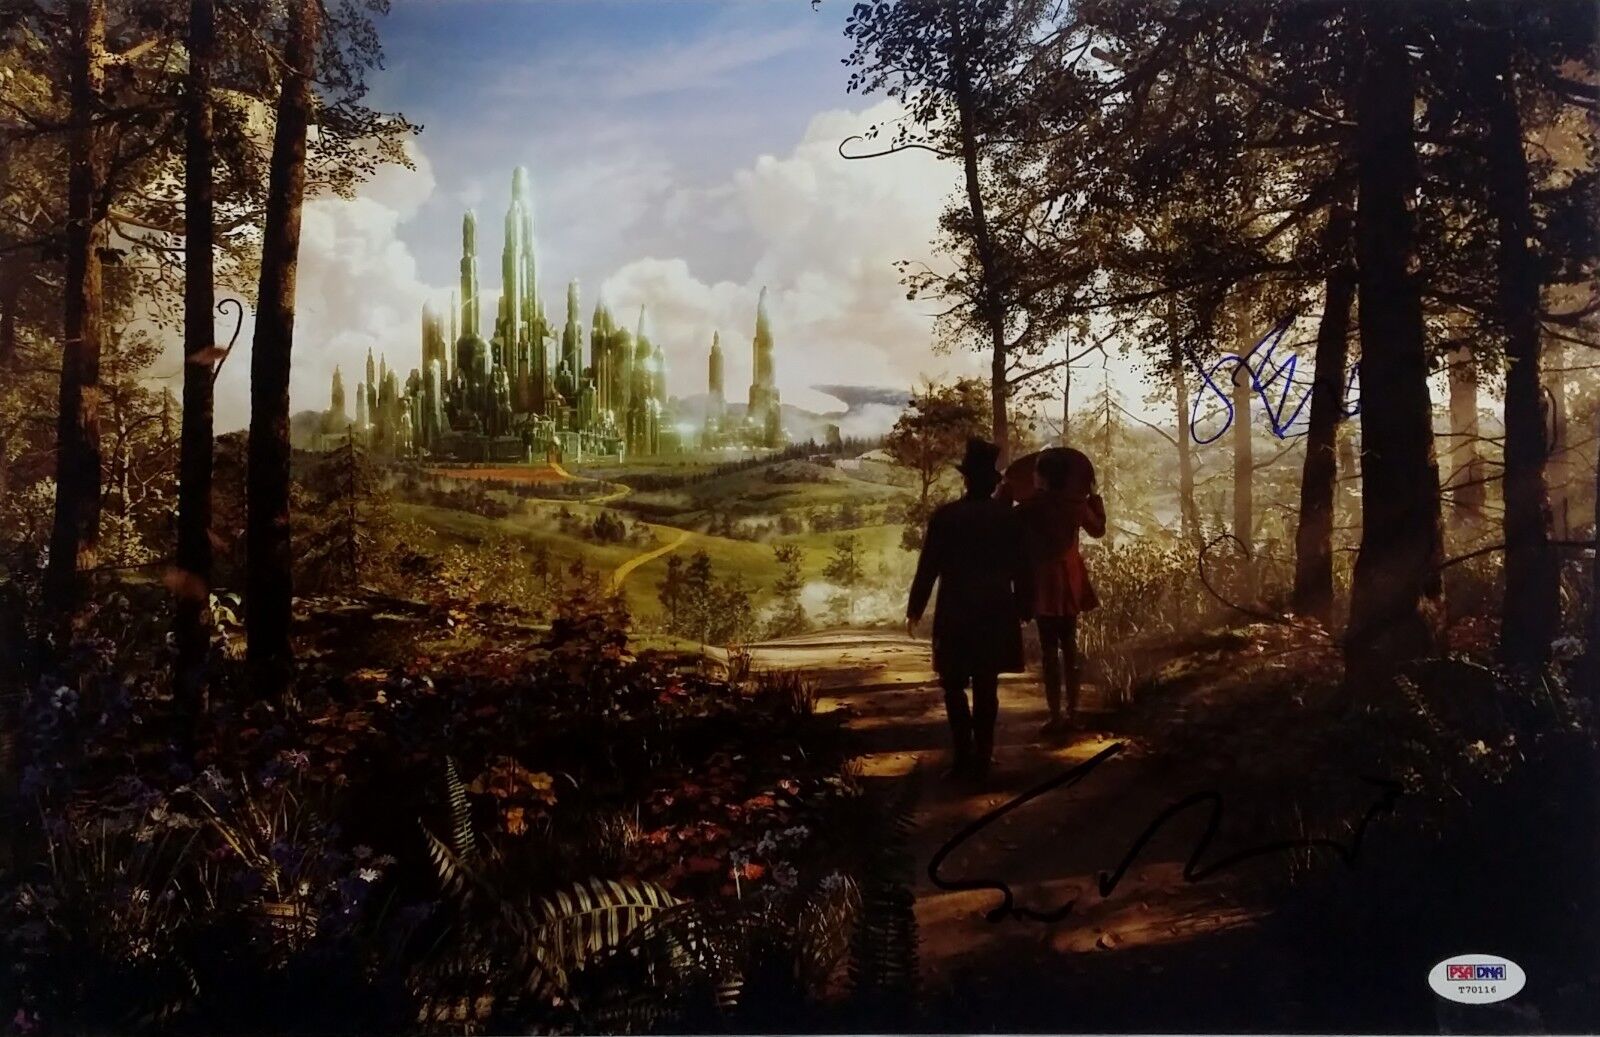 James Franco & Sam Raimi OZ The Great And Powerful Signed 11X17 Photo Poster painting PSA/DNA